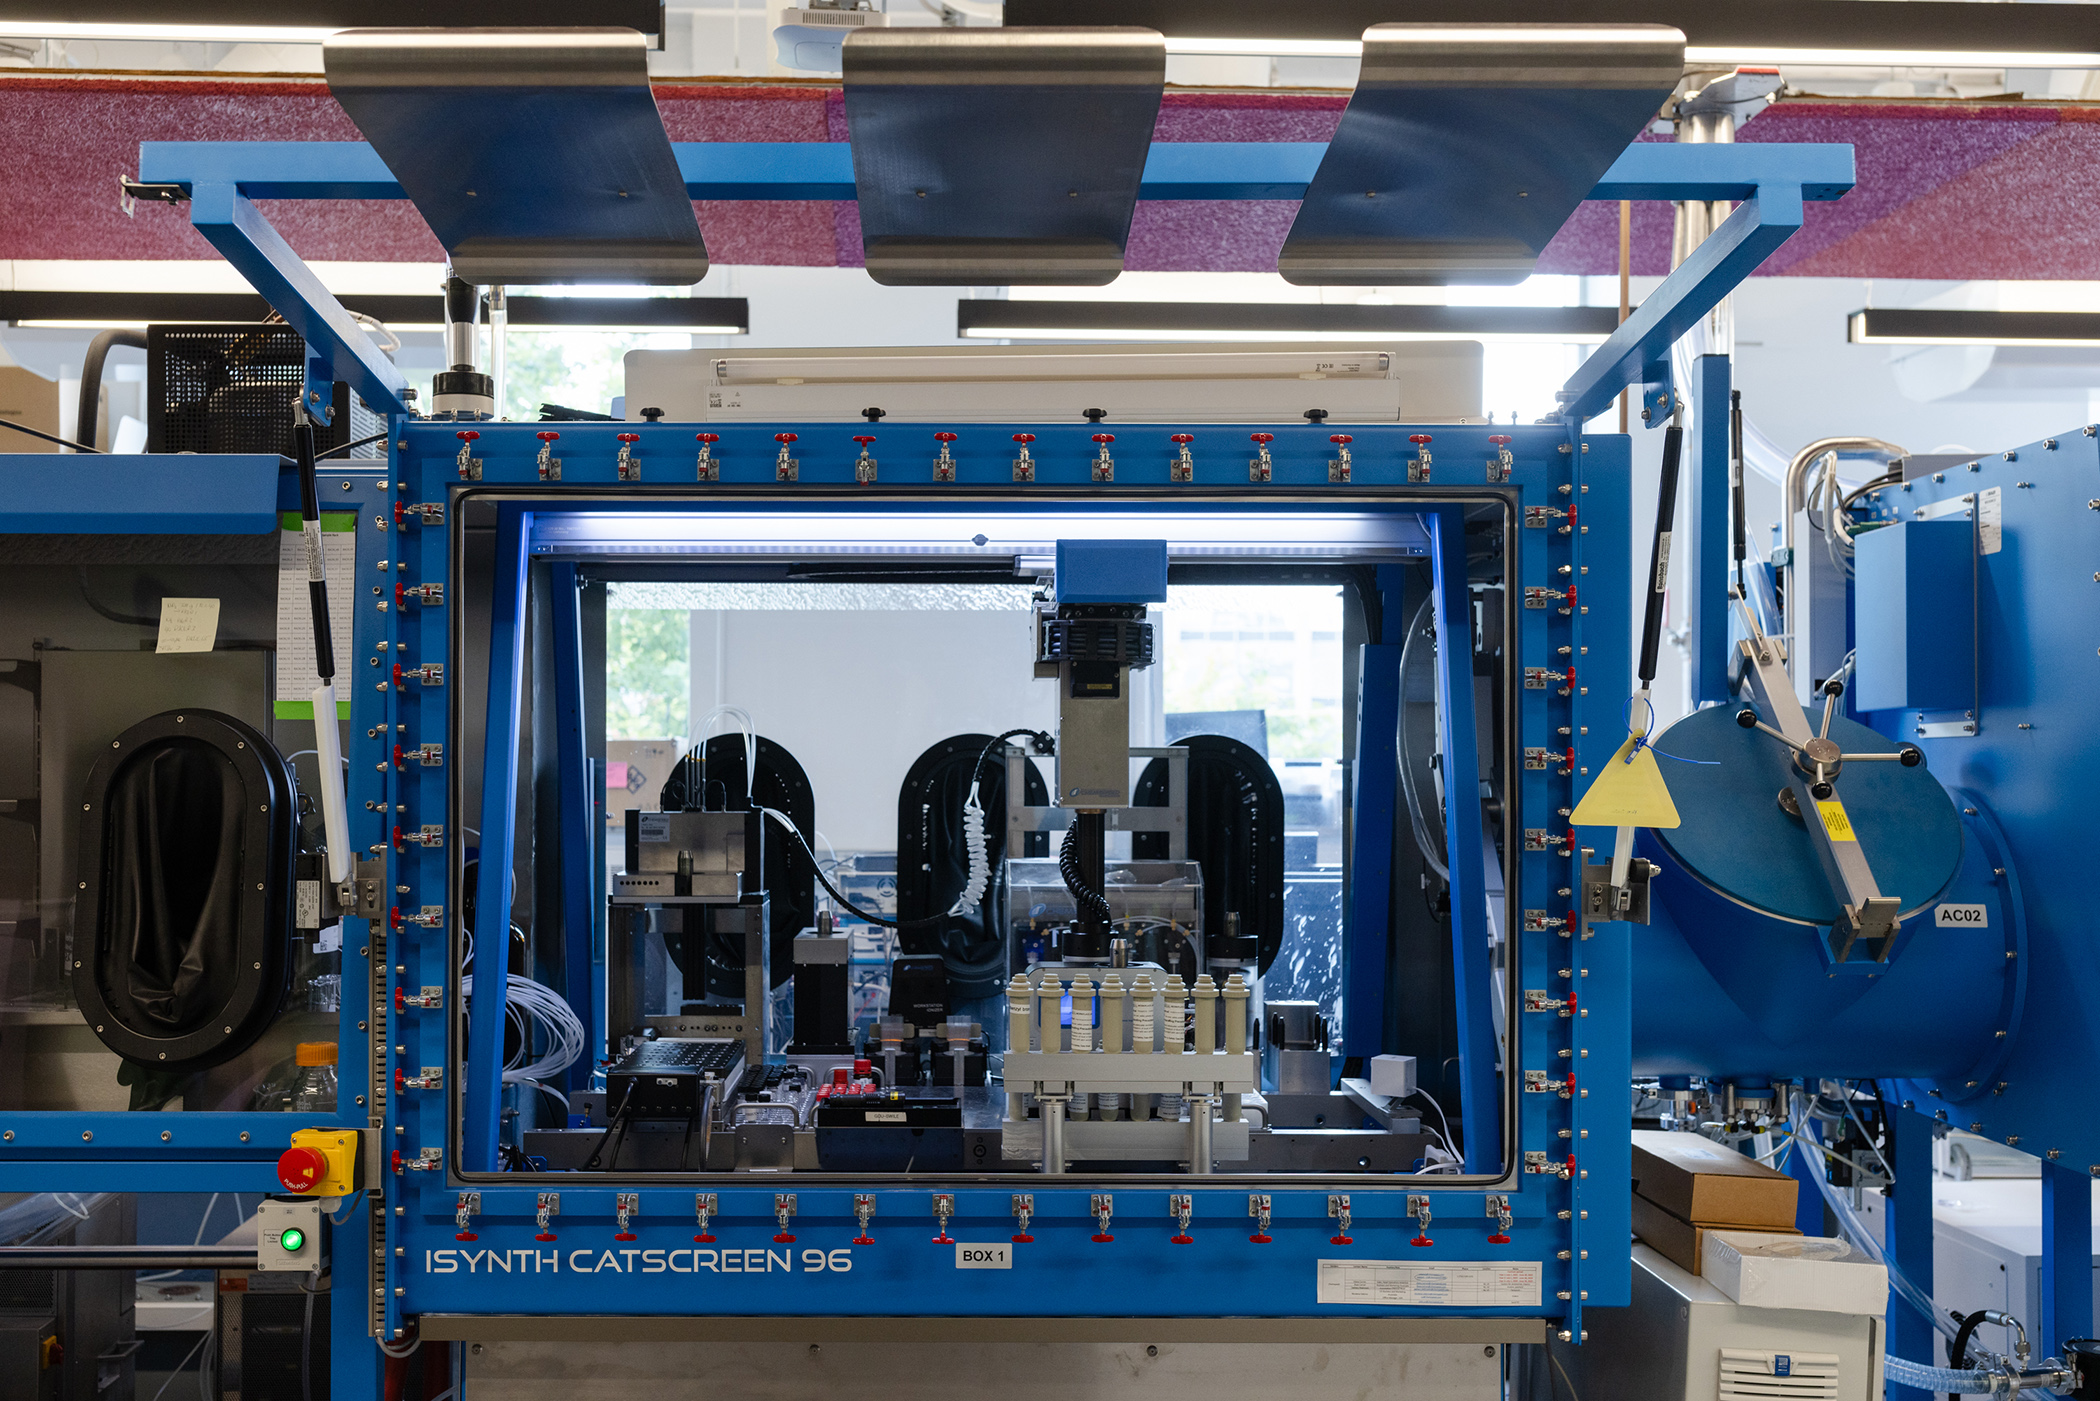 An Isynth Catscreen 96, which is a piece of lab equipment that is robotic. It has a squarish blue metal frame and glass sides. Inside are tubes and a robotic arm